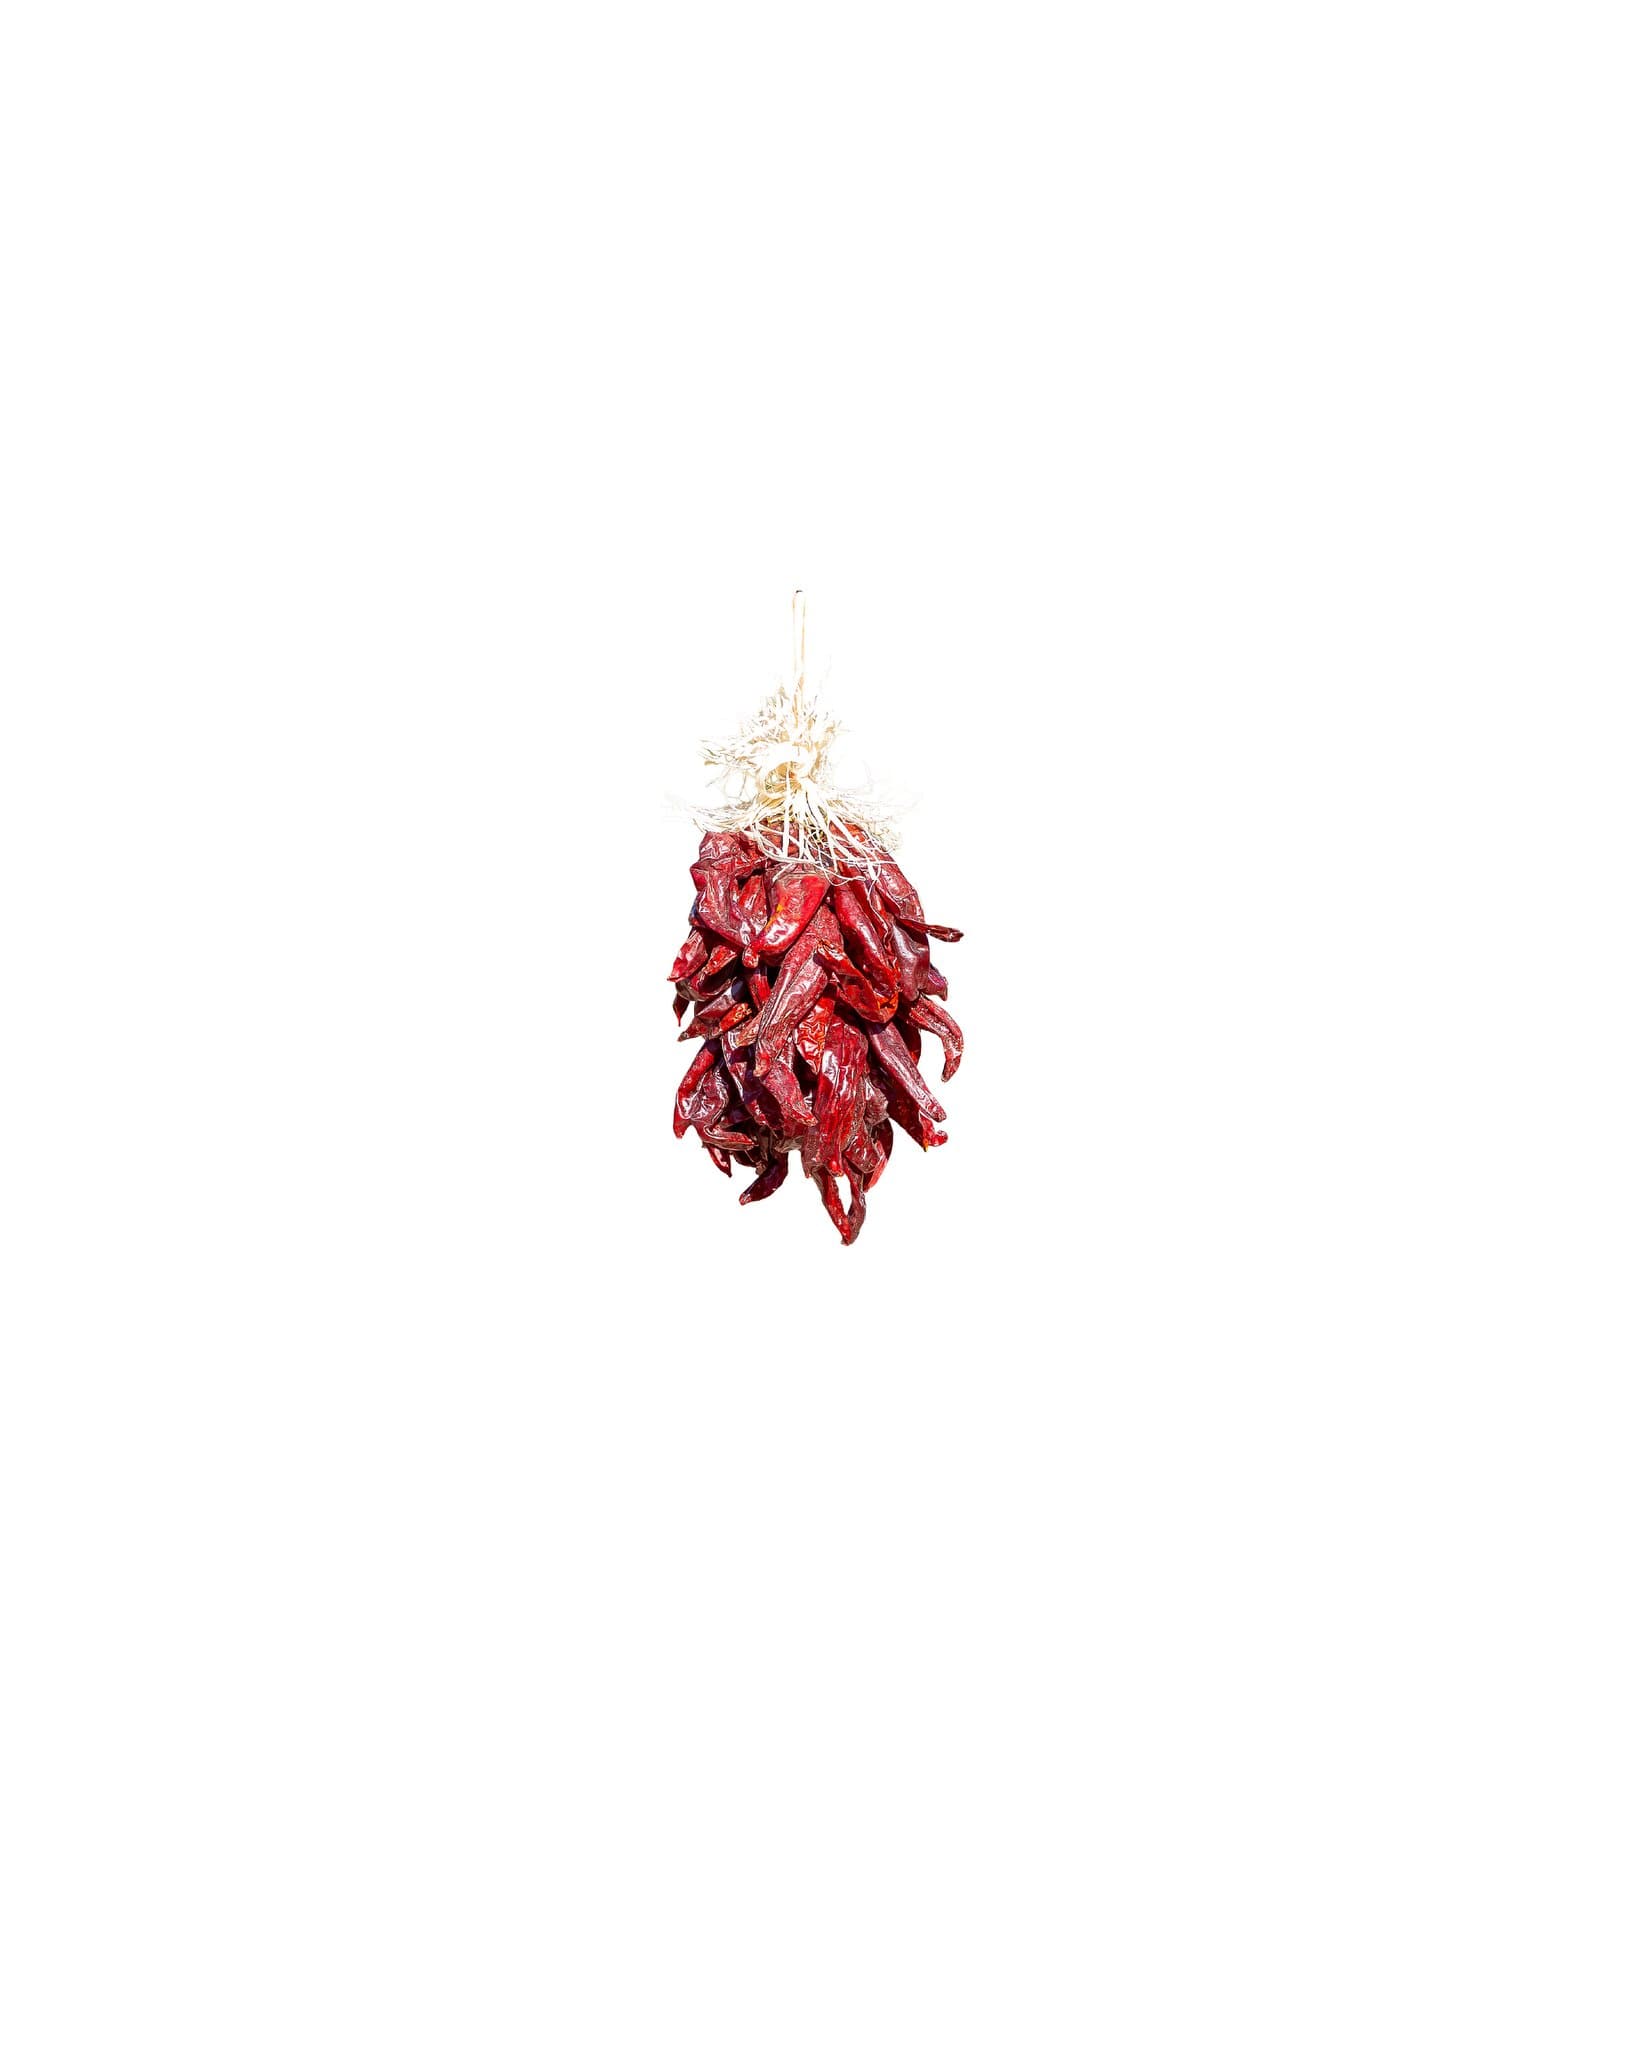 A bundle of dried Traditional Sandia Ristras hanging from a string against a white background.